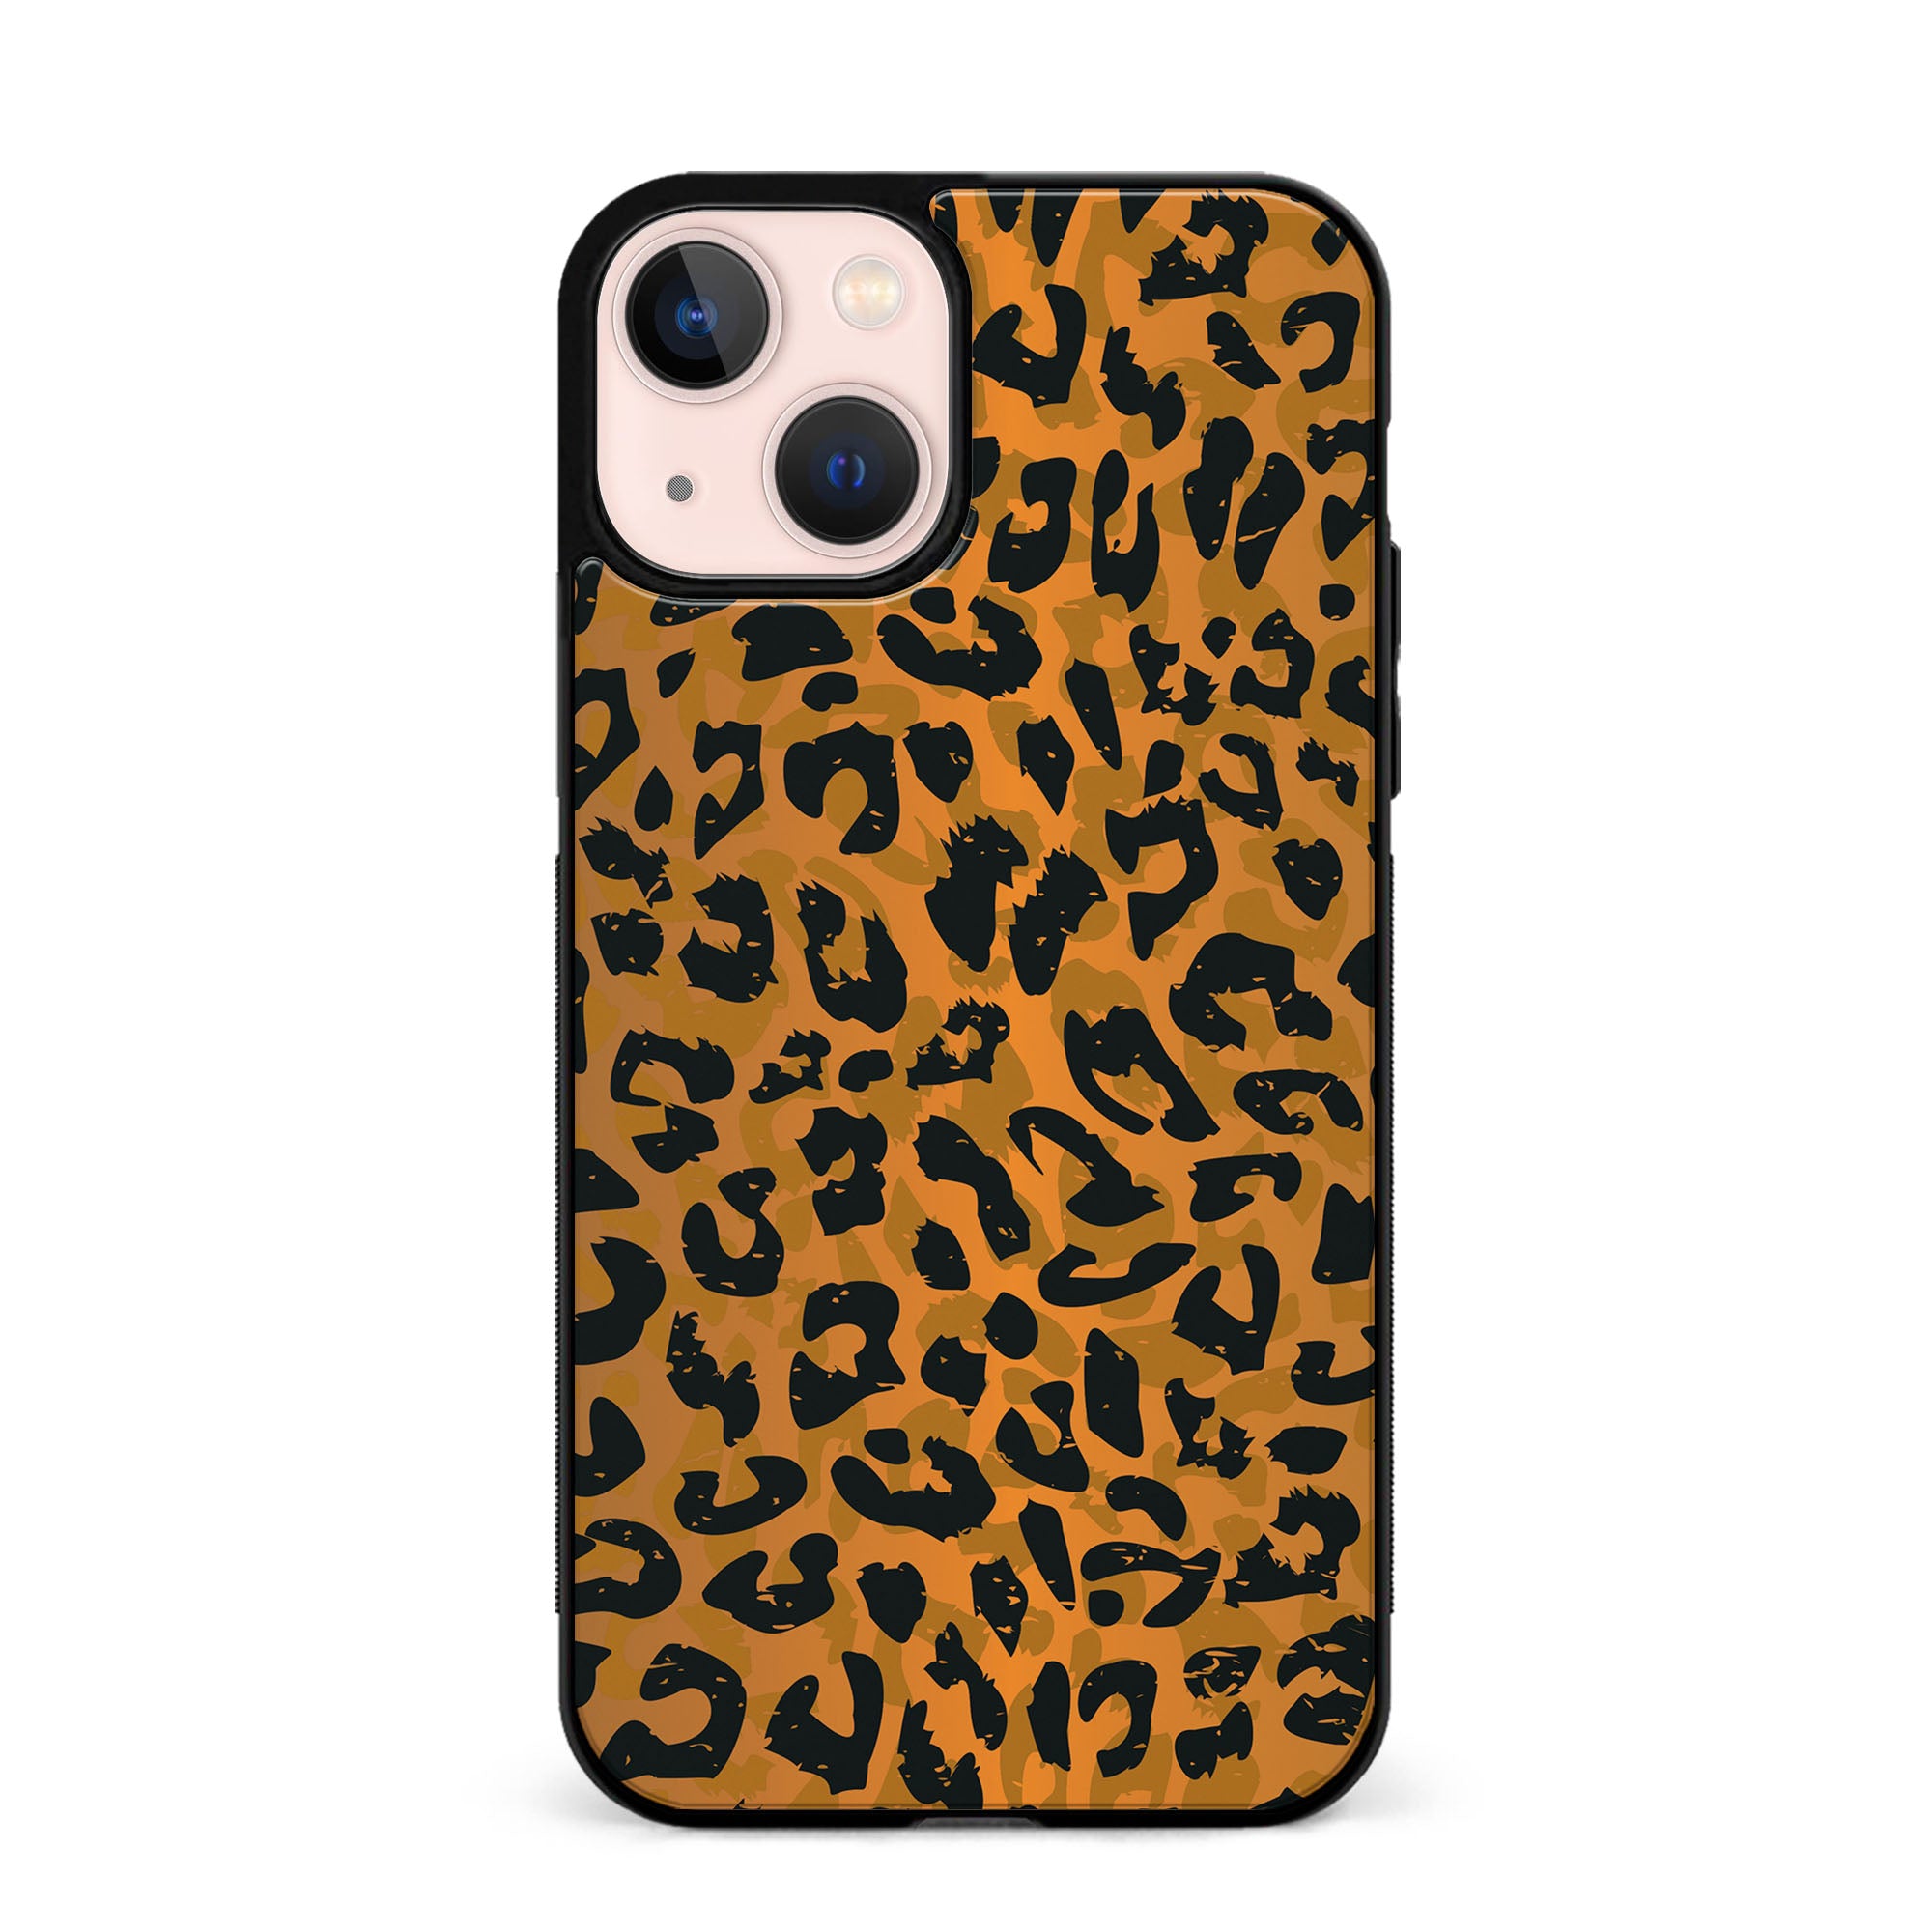 Leopard Print Rubber Phone Case for iPhone, Samsung, Huawei & Pixel